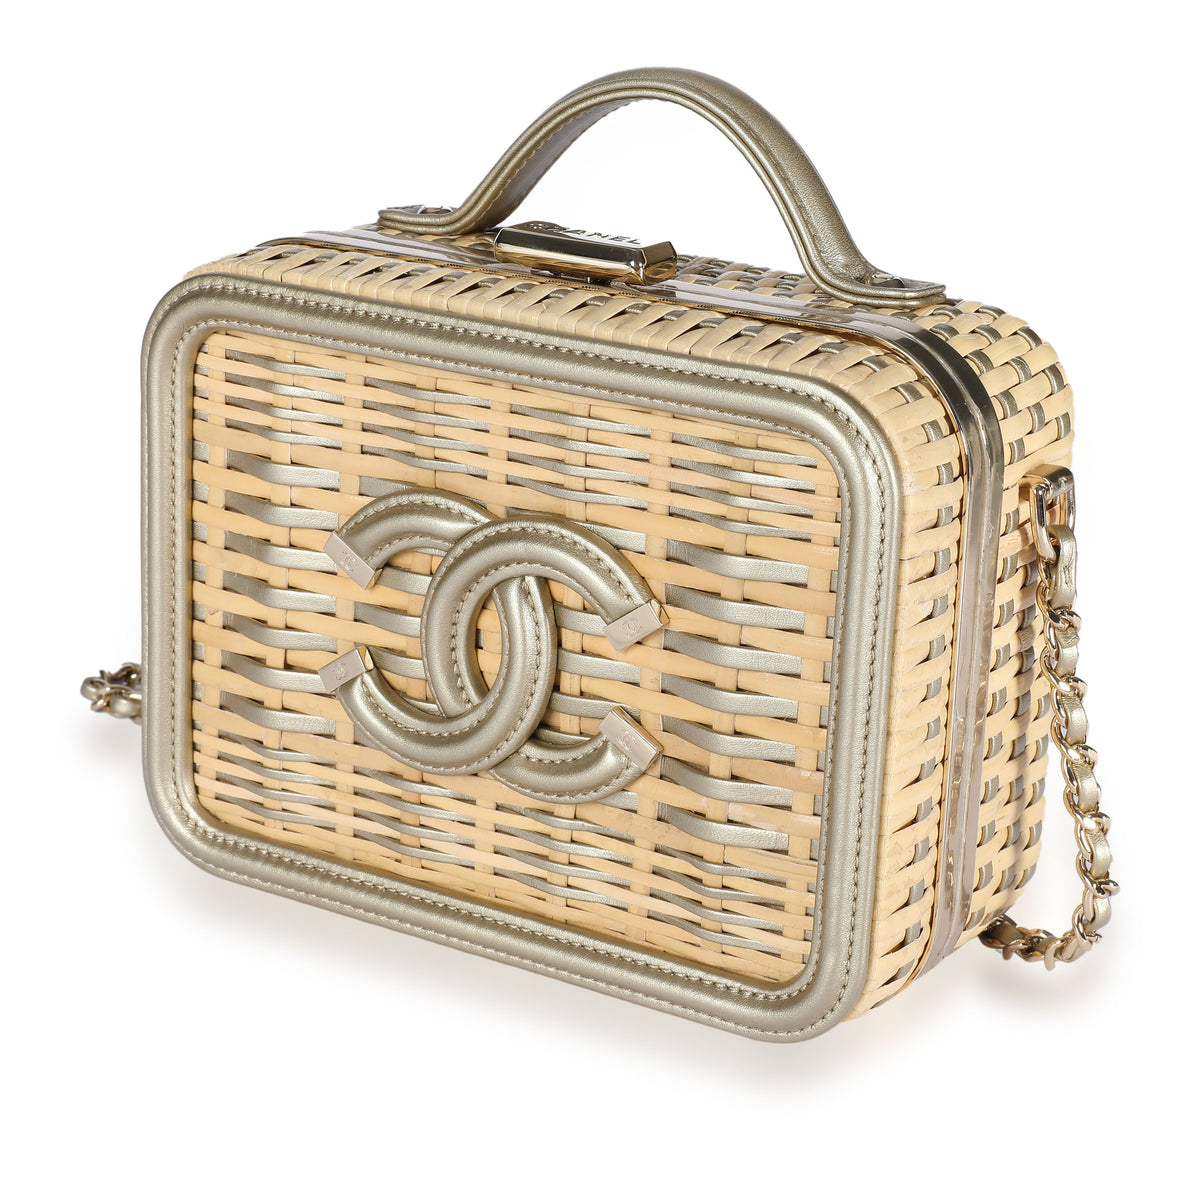 CHANEL VANITY CASE (2918xxxx) SMALL SIZE, WHITE LEATHER & RATTAN, SILVER  HARDWARE, WITH CARD, DUST COVER & BOX